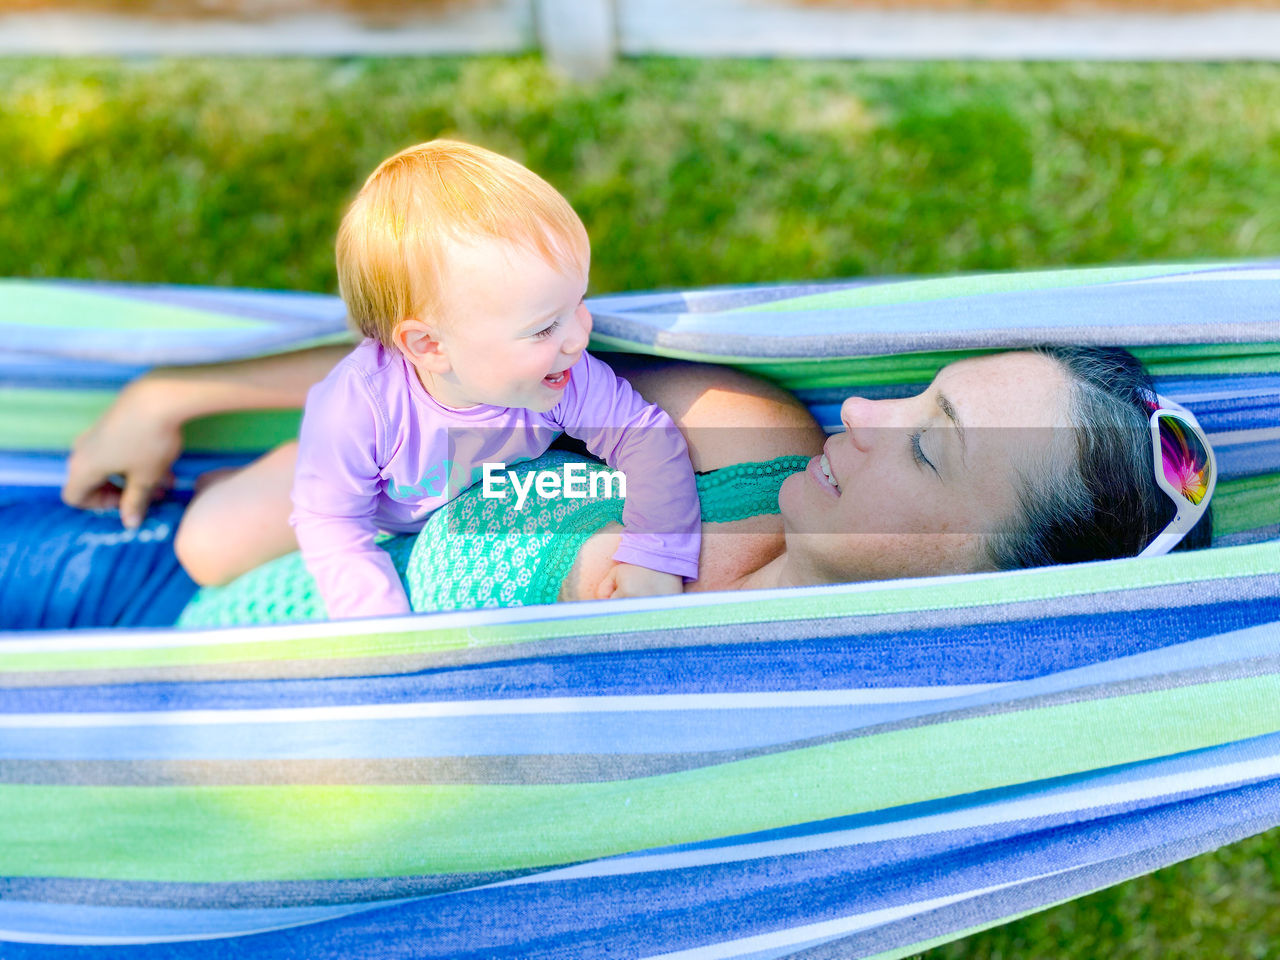 Mom and infant daughter in a hammock